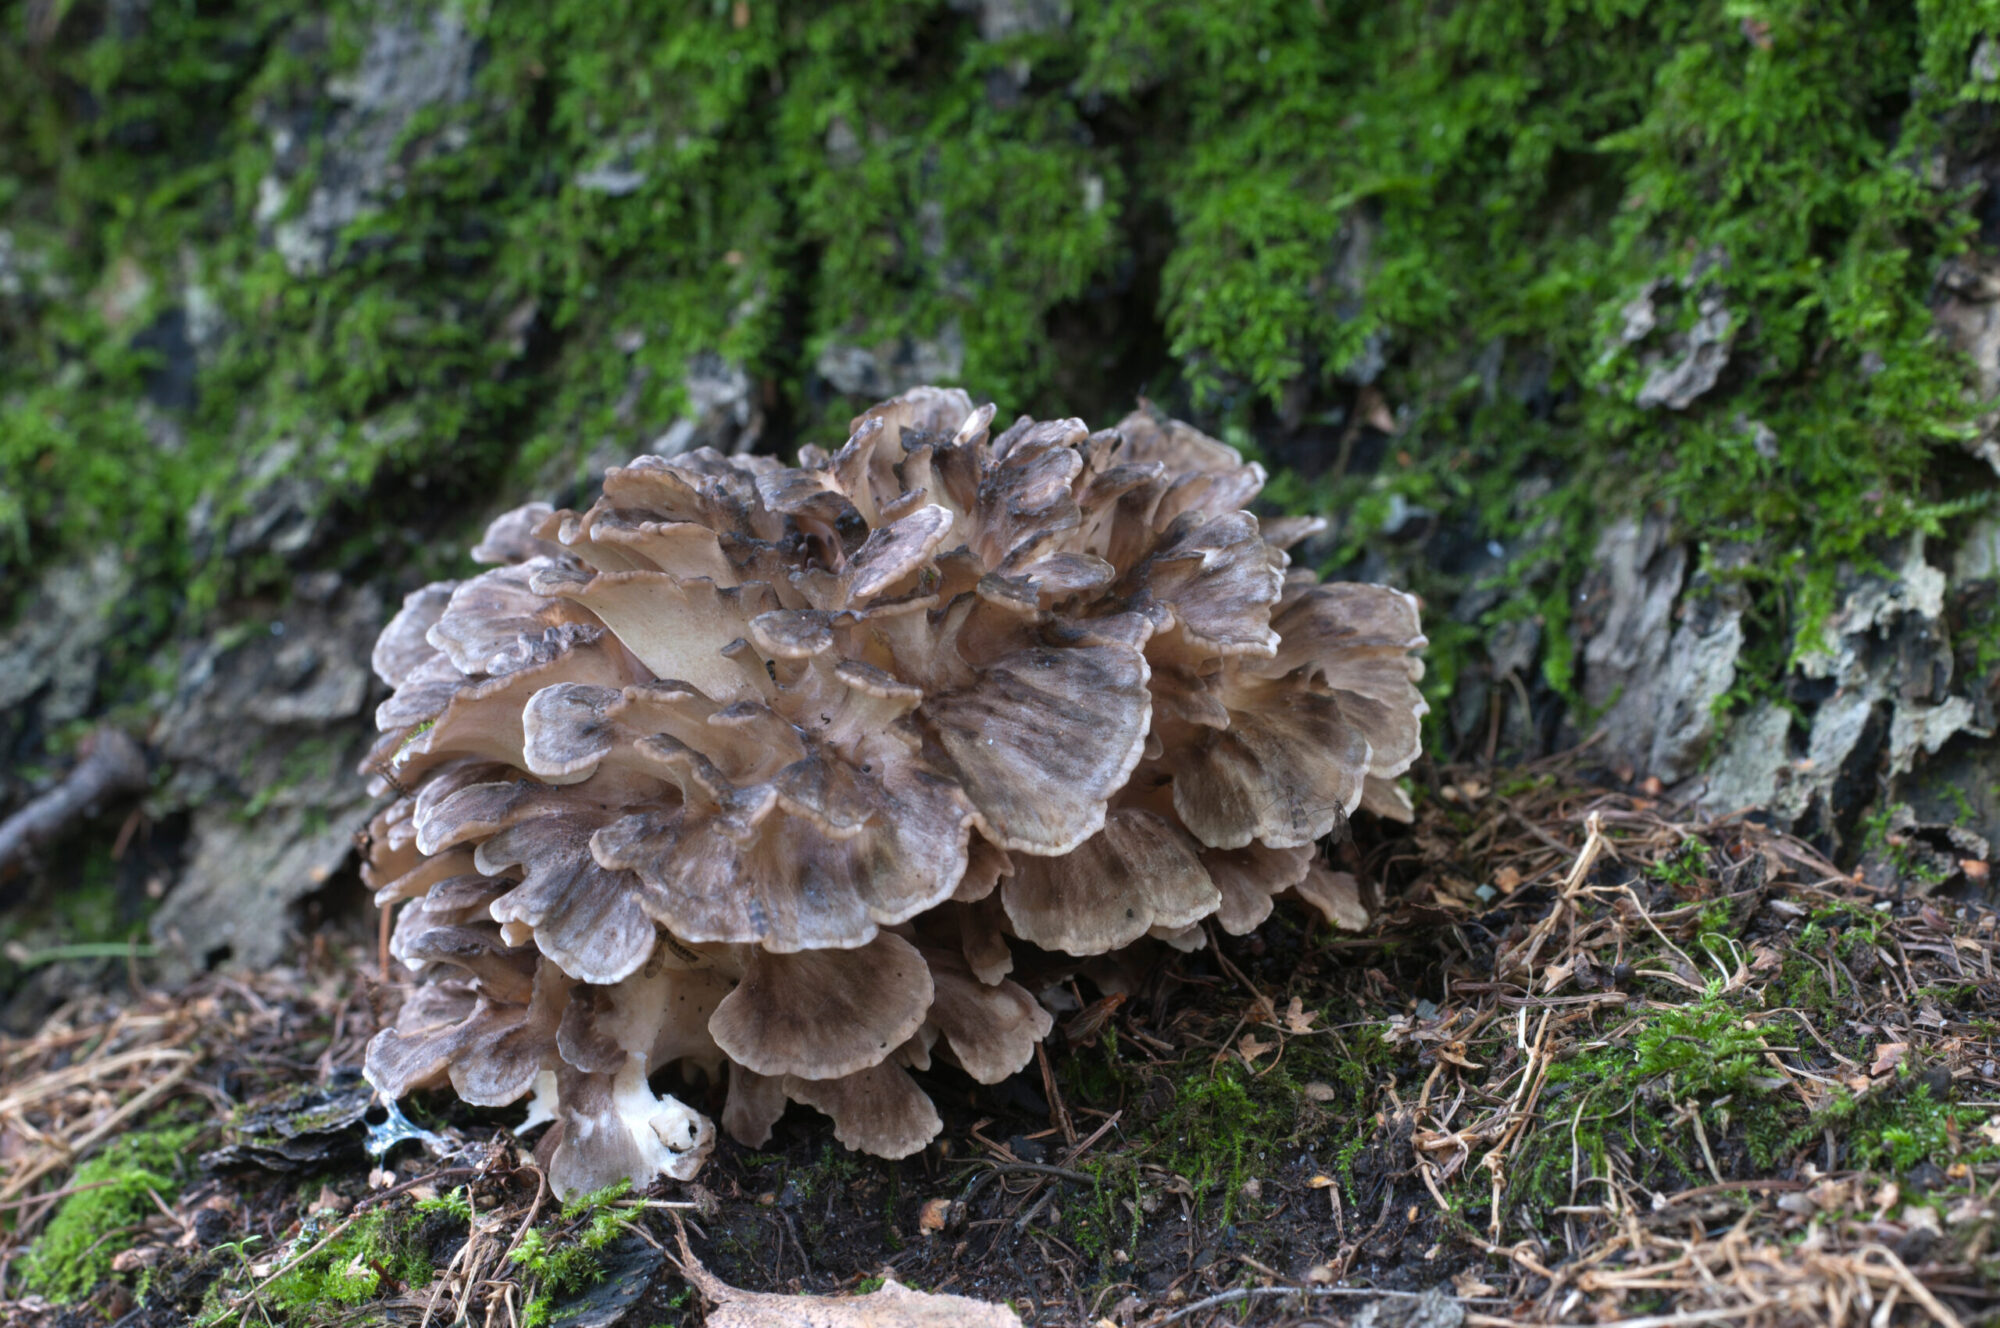 Hen of the woods mushroom at base of tree